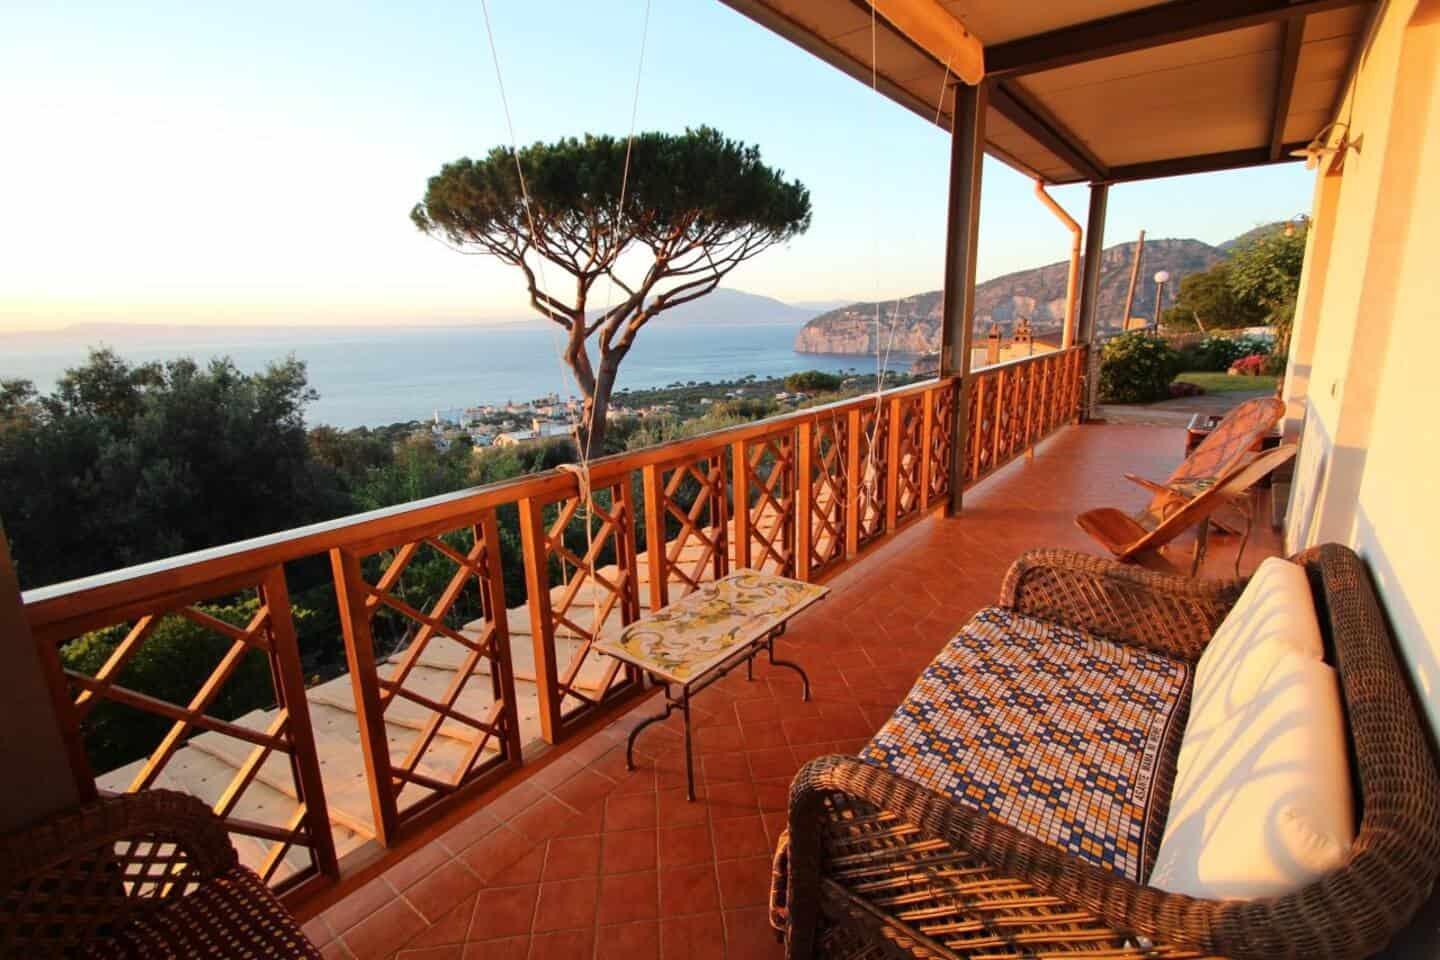 Image of Airbnb rental in Sorrento, Italy